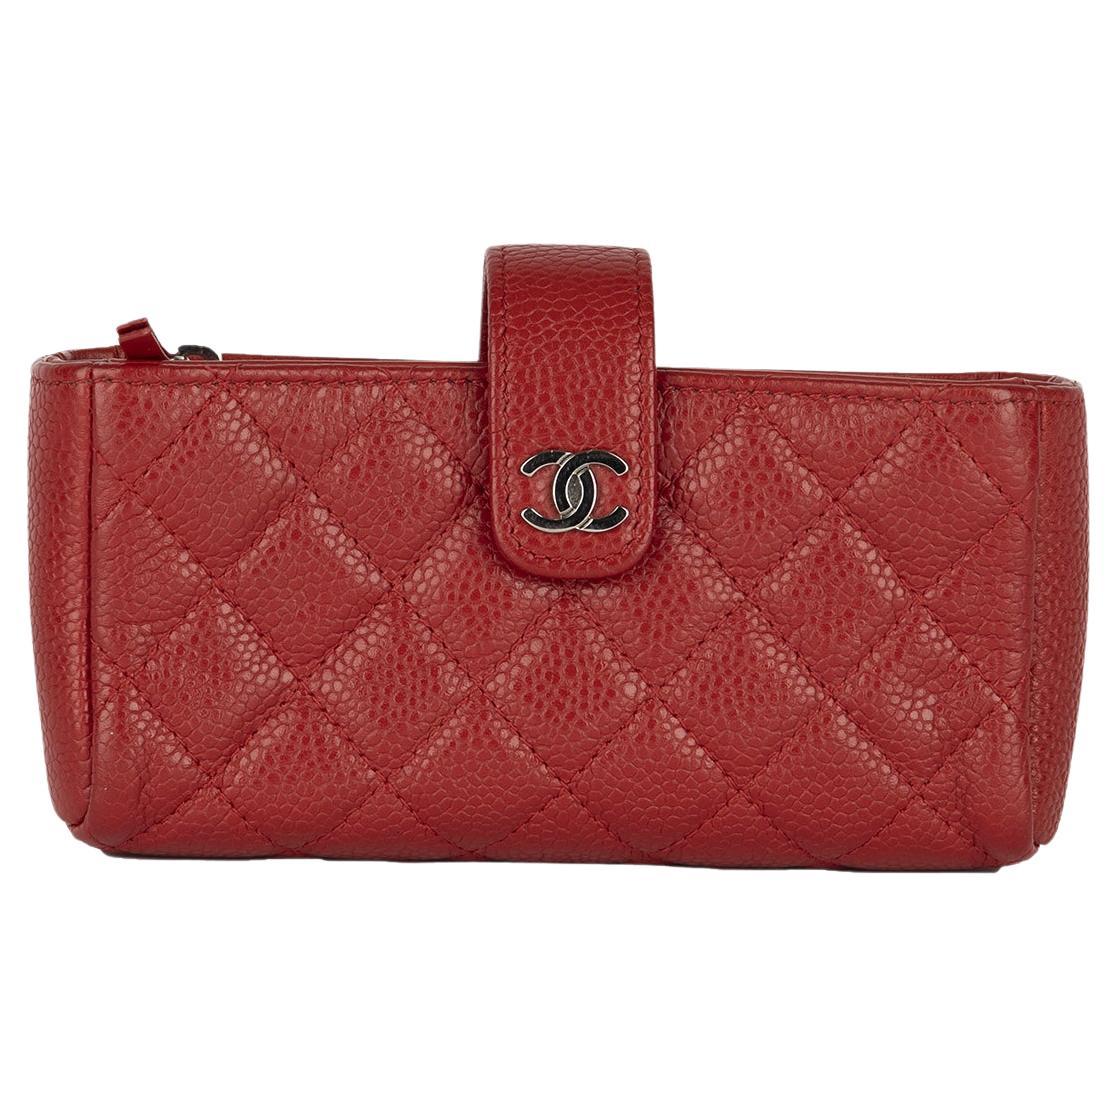 Chanel Quilted Caviar Mini Phone Holder Clutch - '10s